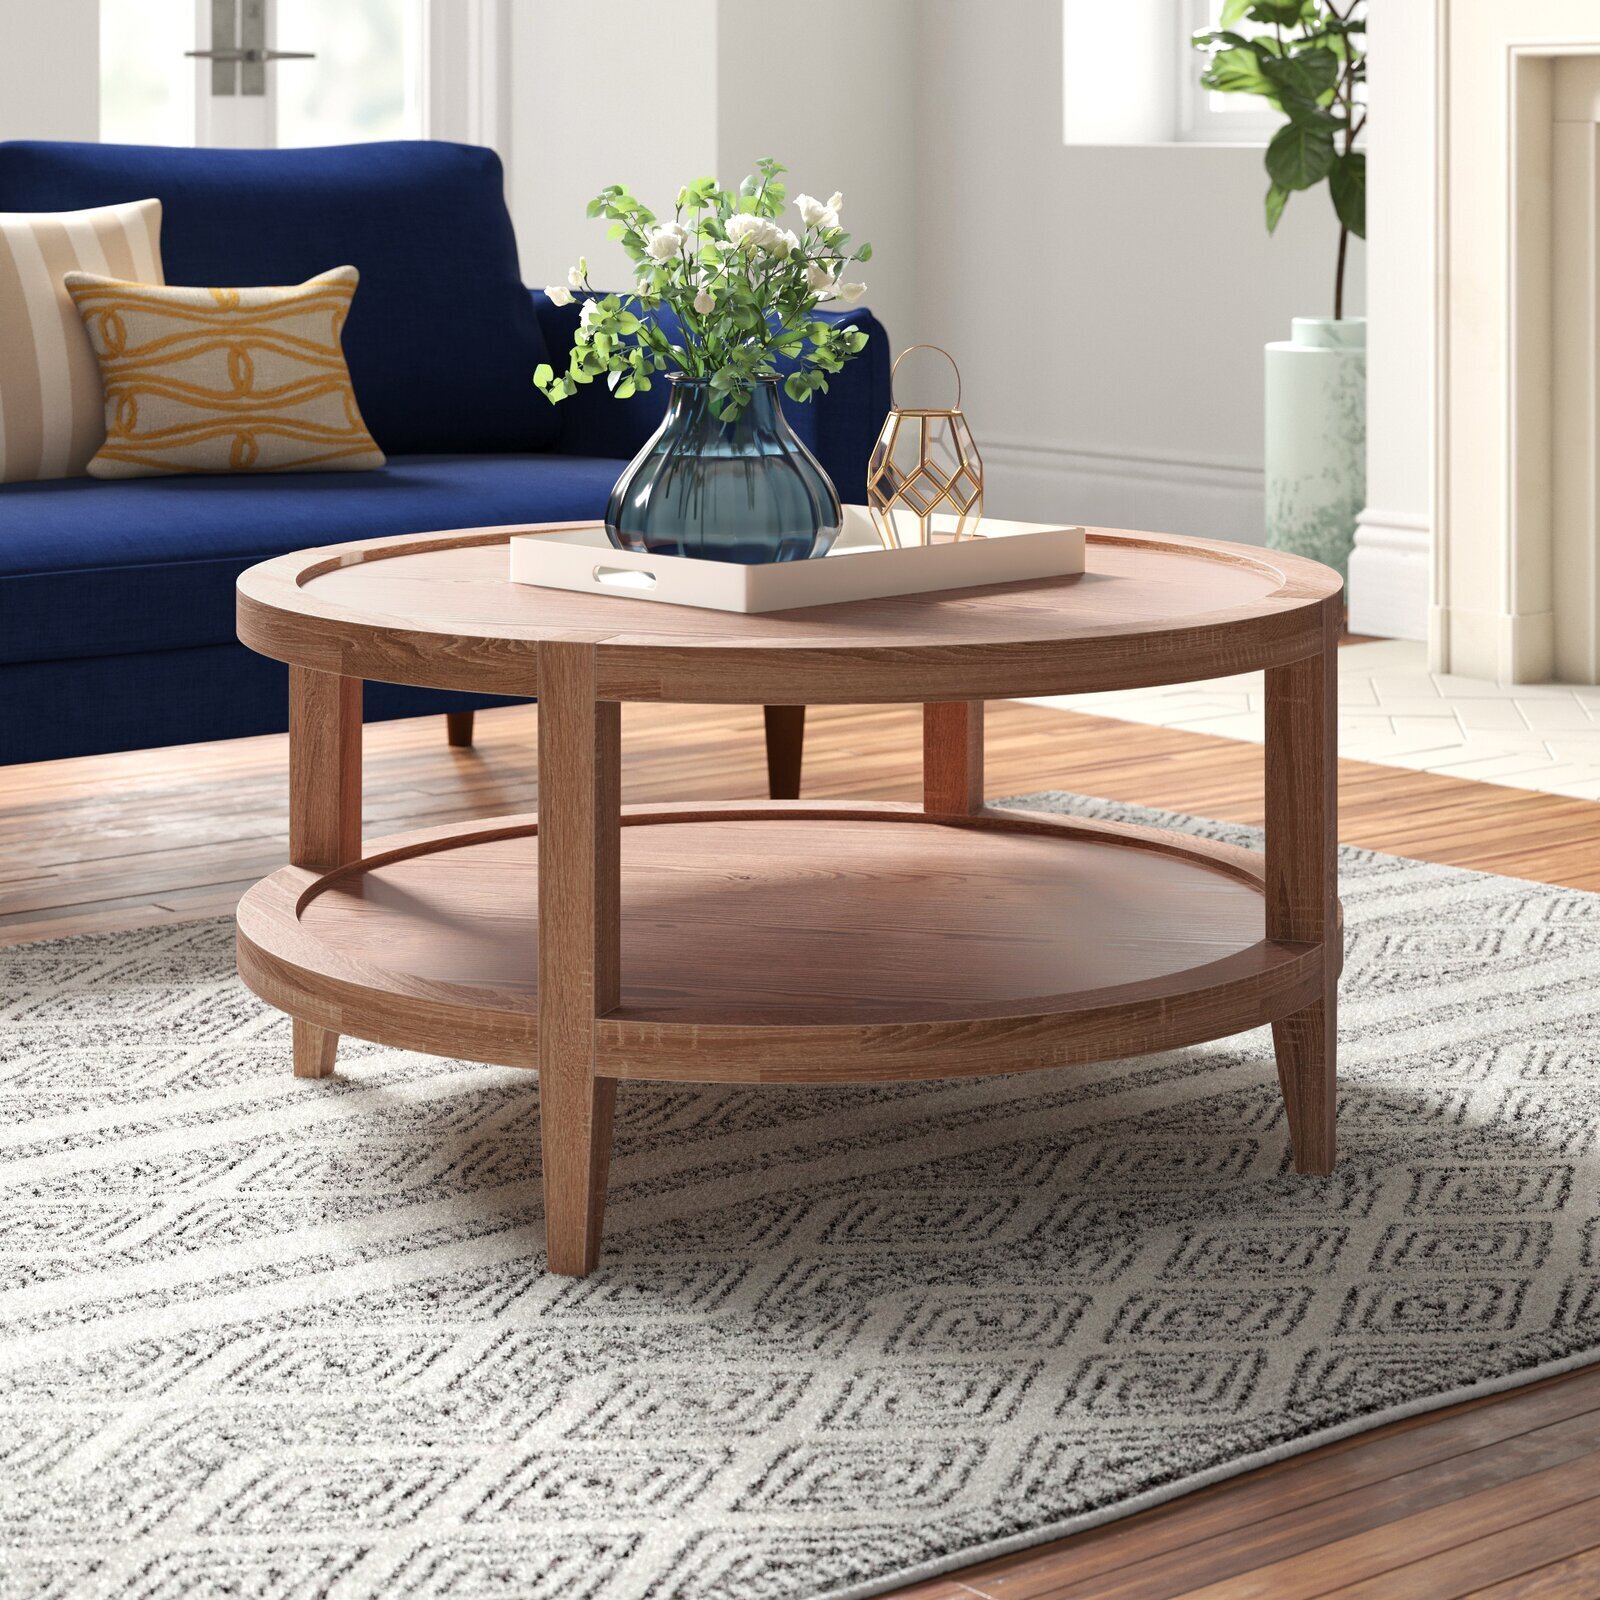 Double Topped Round Wood Coffee Table